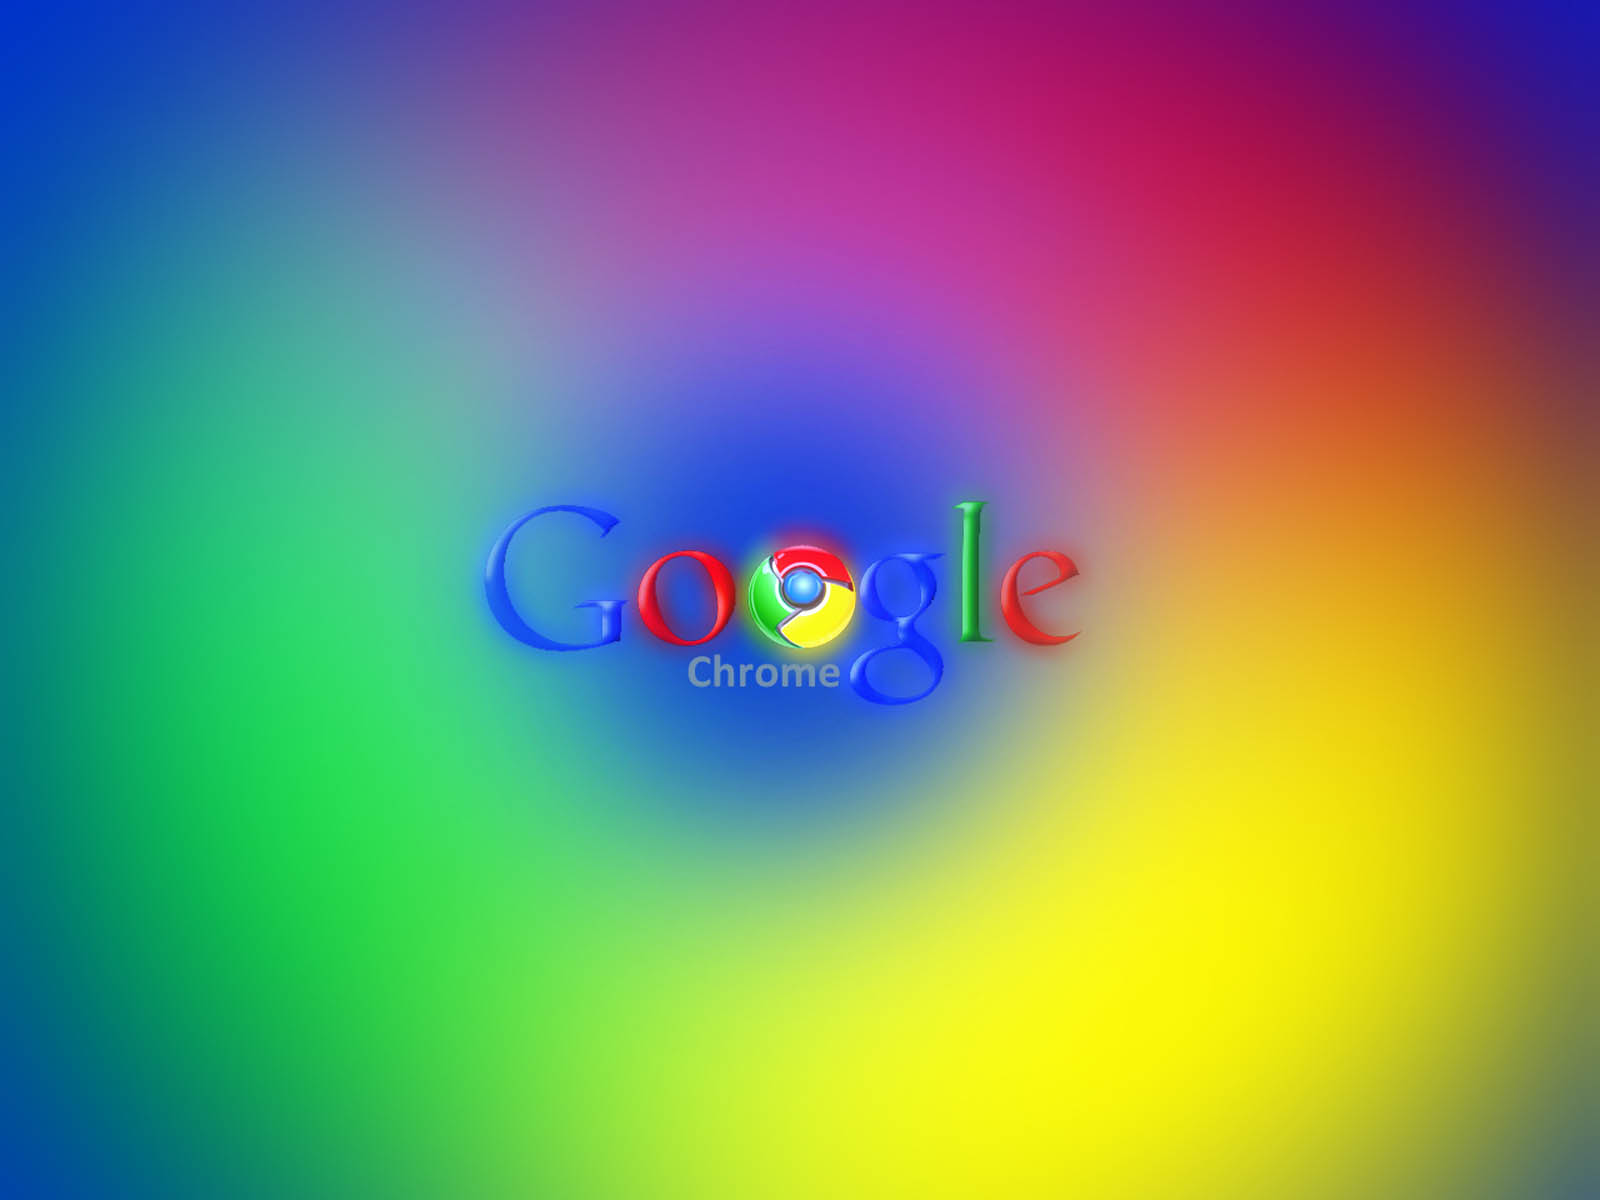 google wallpaper background,graphic design,circle,colorfulness,sky,font